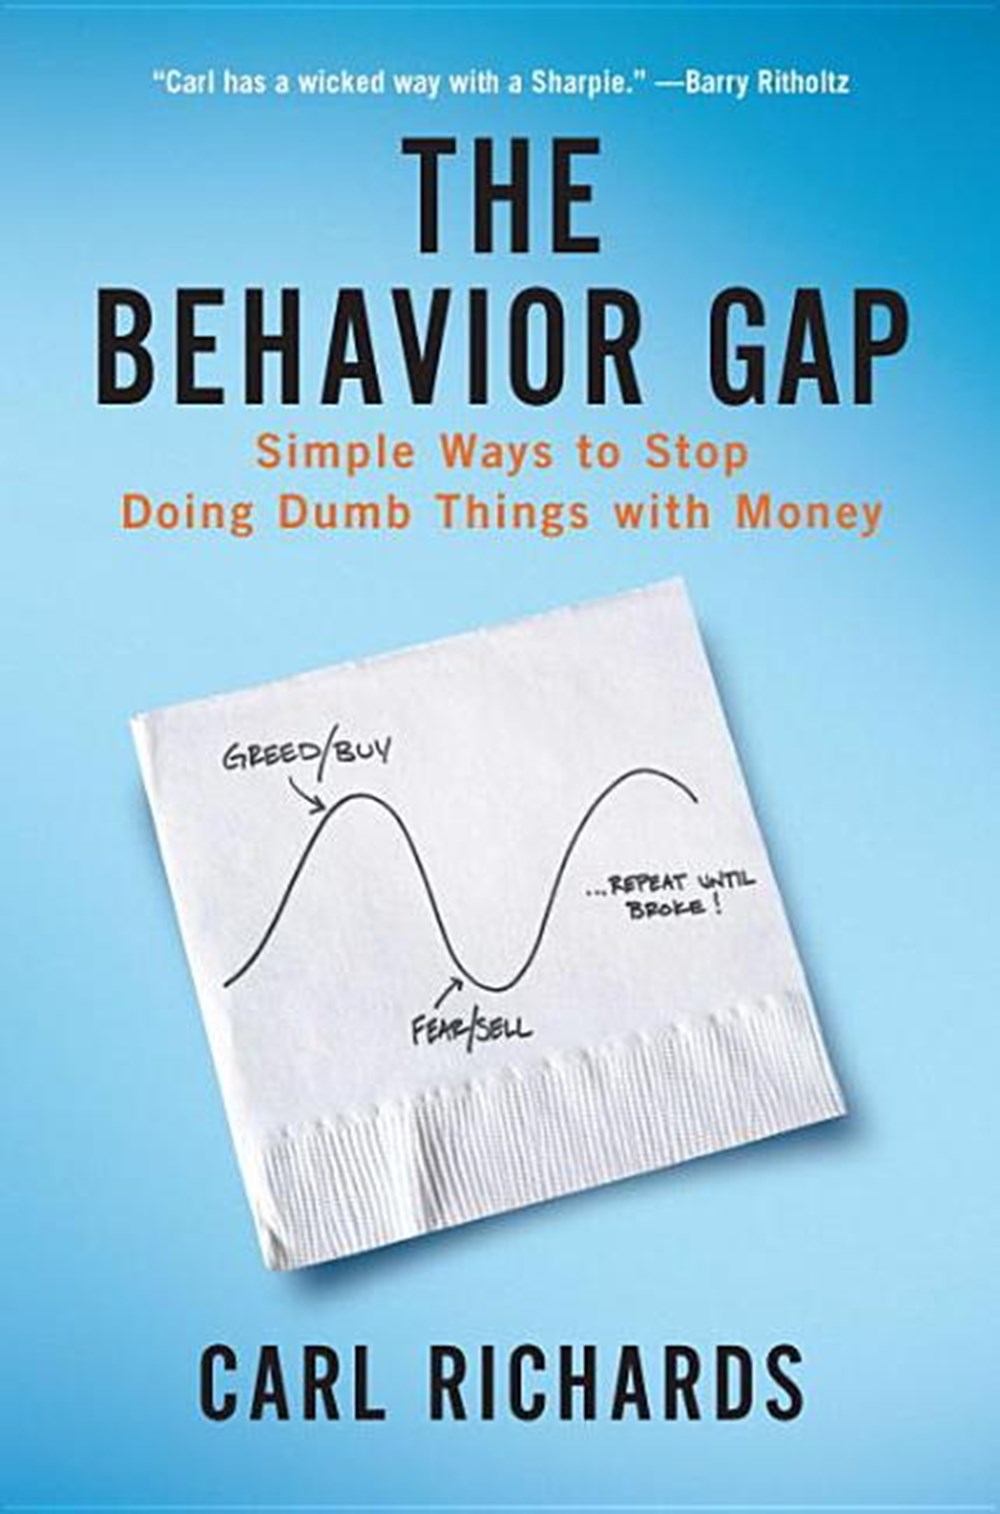 Behavior Gap Simple Ways to Stop Doing Dumb Things with Money